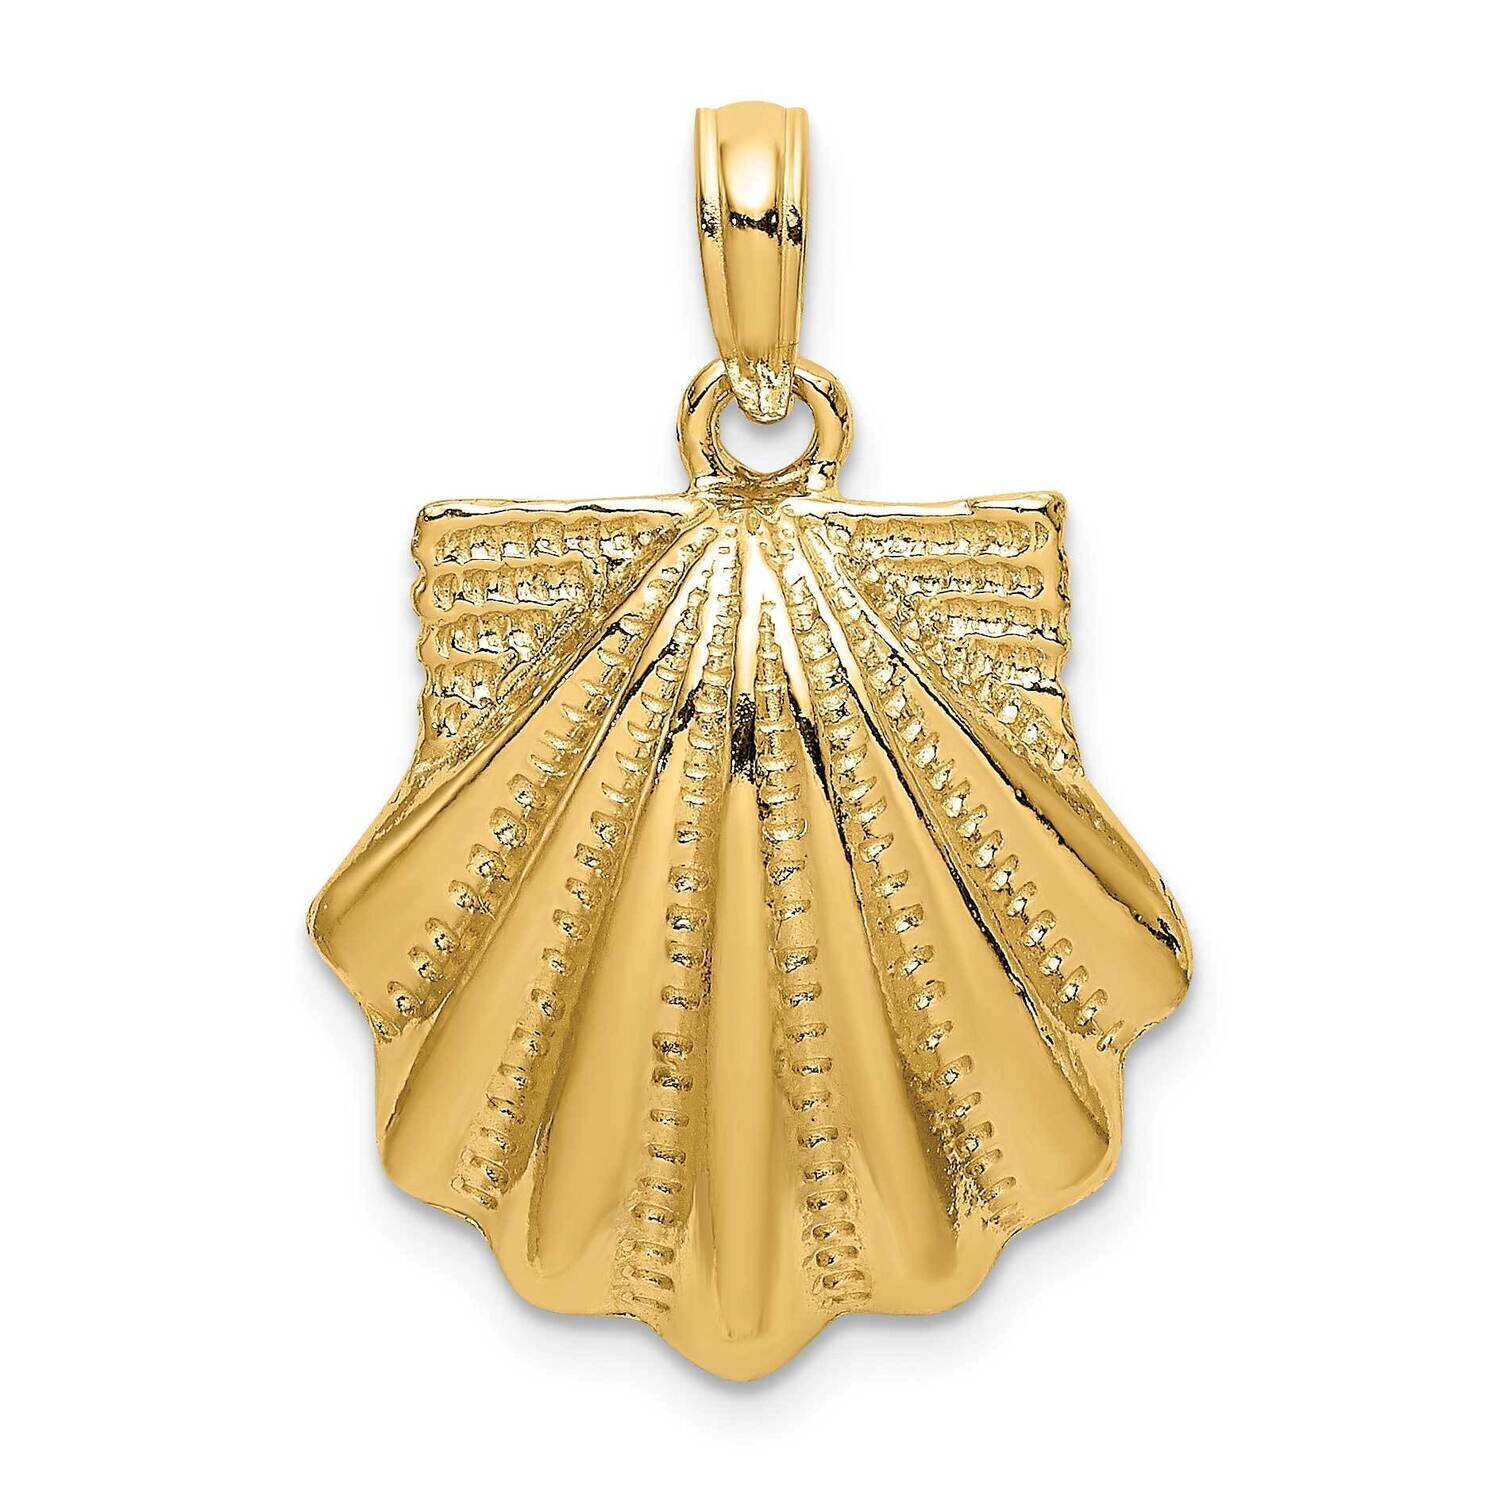 2-D Scallop Shell Charm 14k Gold Textured K7657